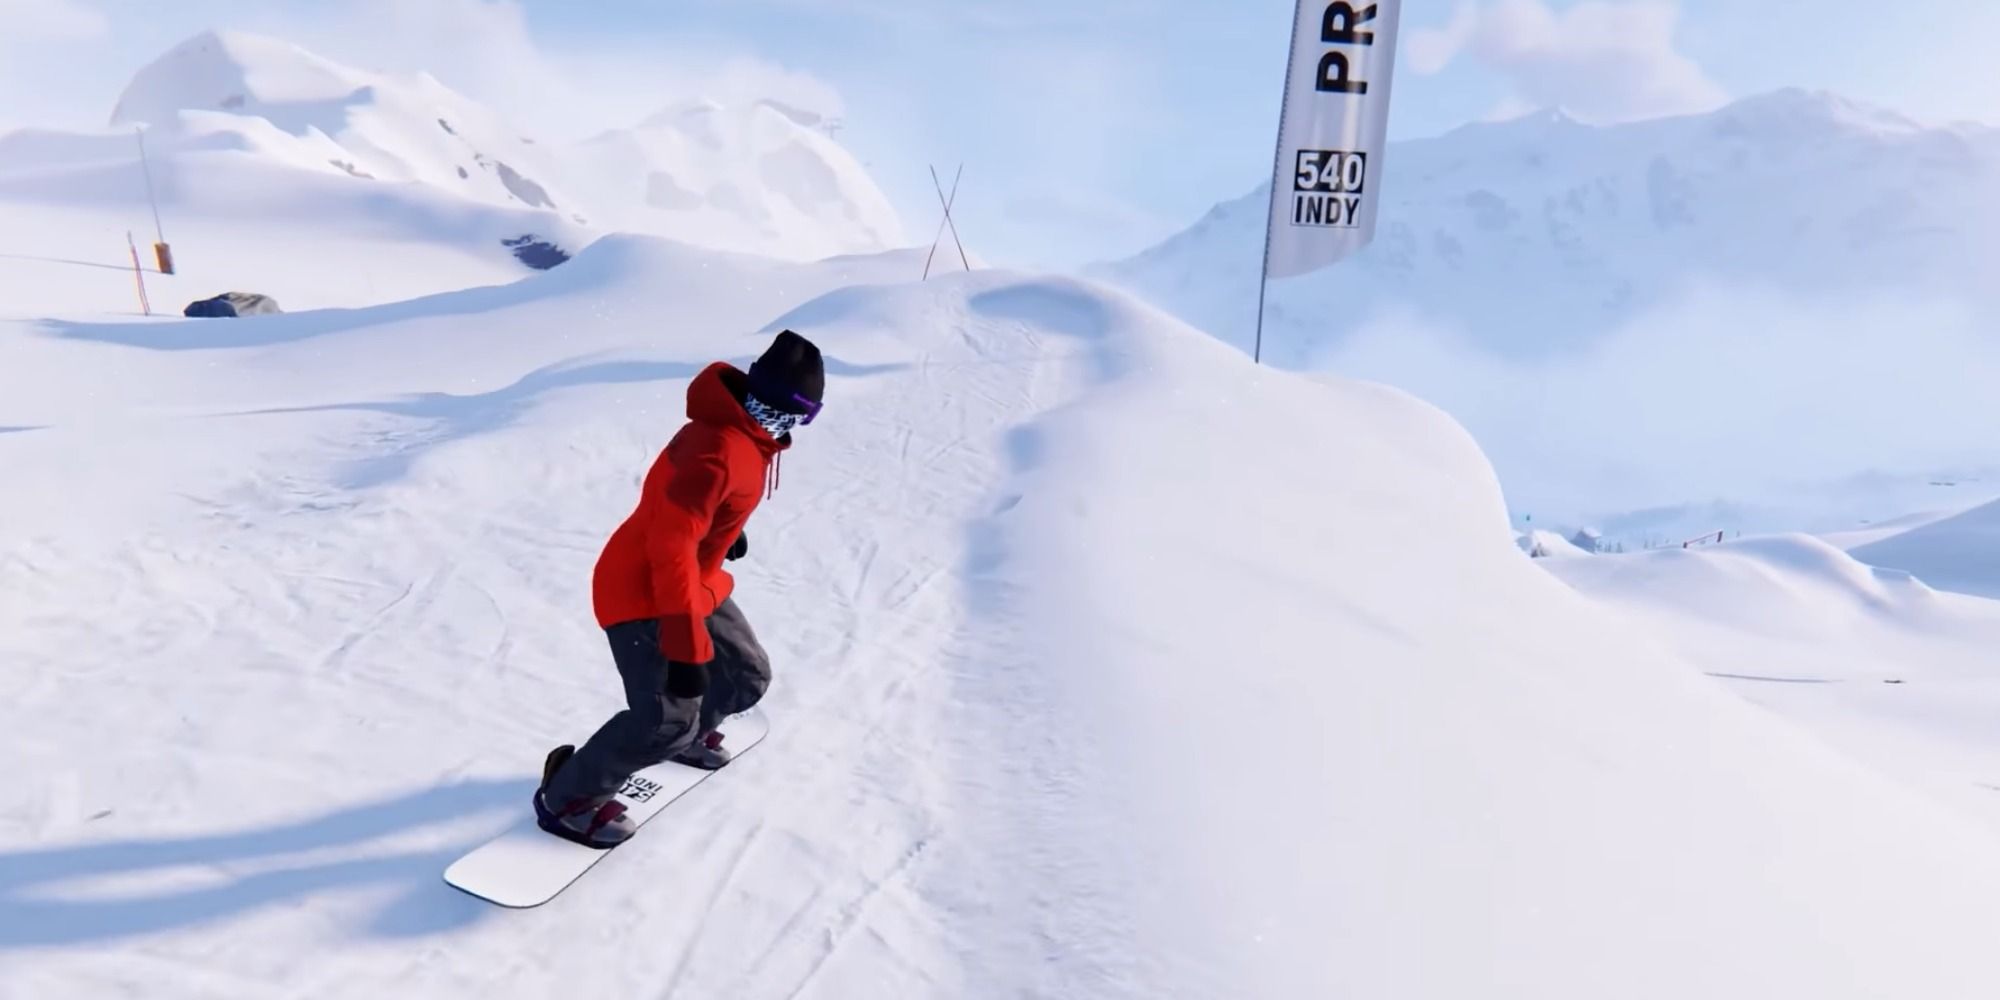 snowboarder lining up to do a big jump in shredders